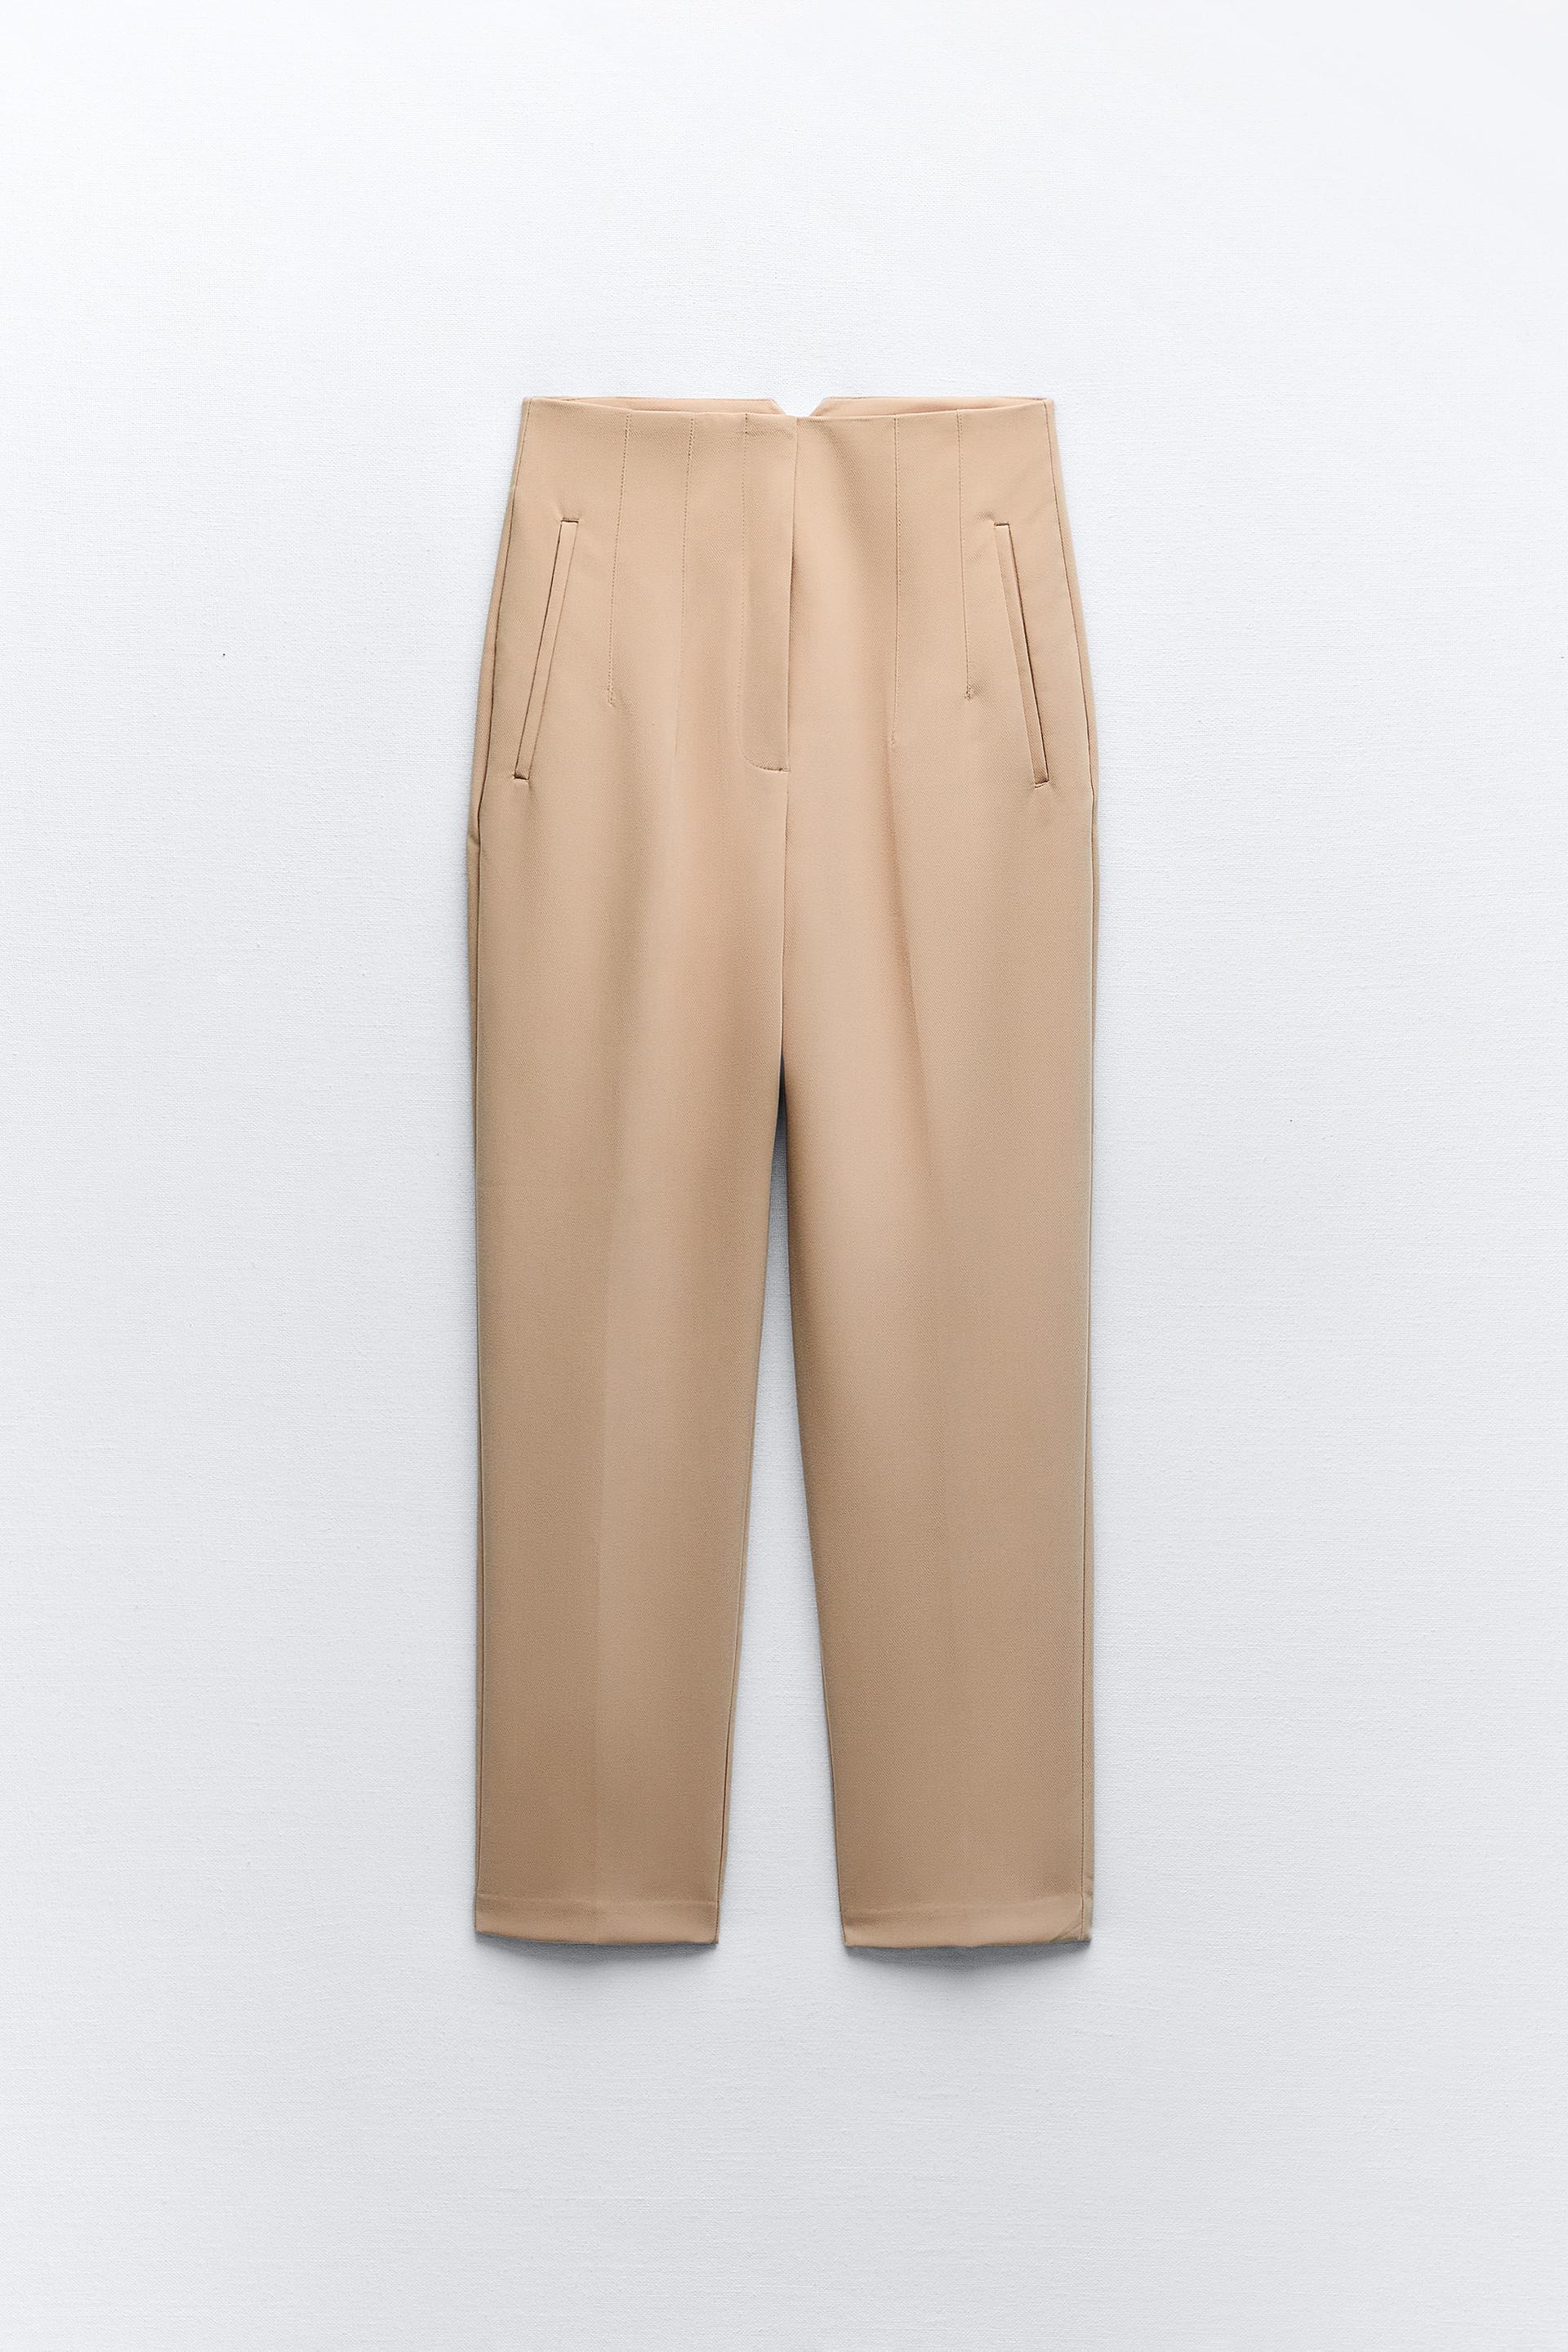 ZARA HIGH WAISTED Seam Tailored Pants Tapered Ankle Capri Trousers Welt  Pockets $32.74 - PicClick